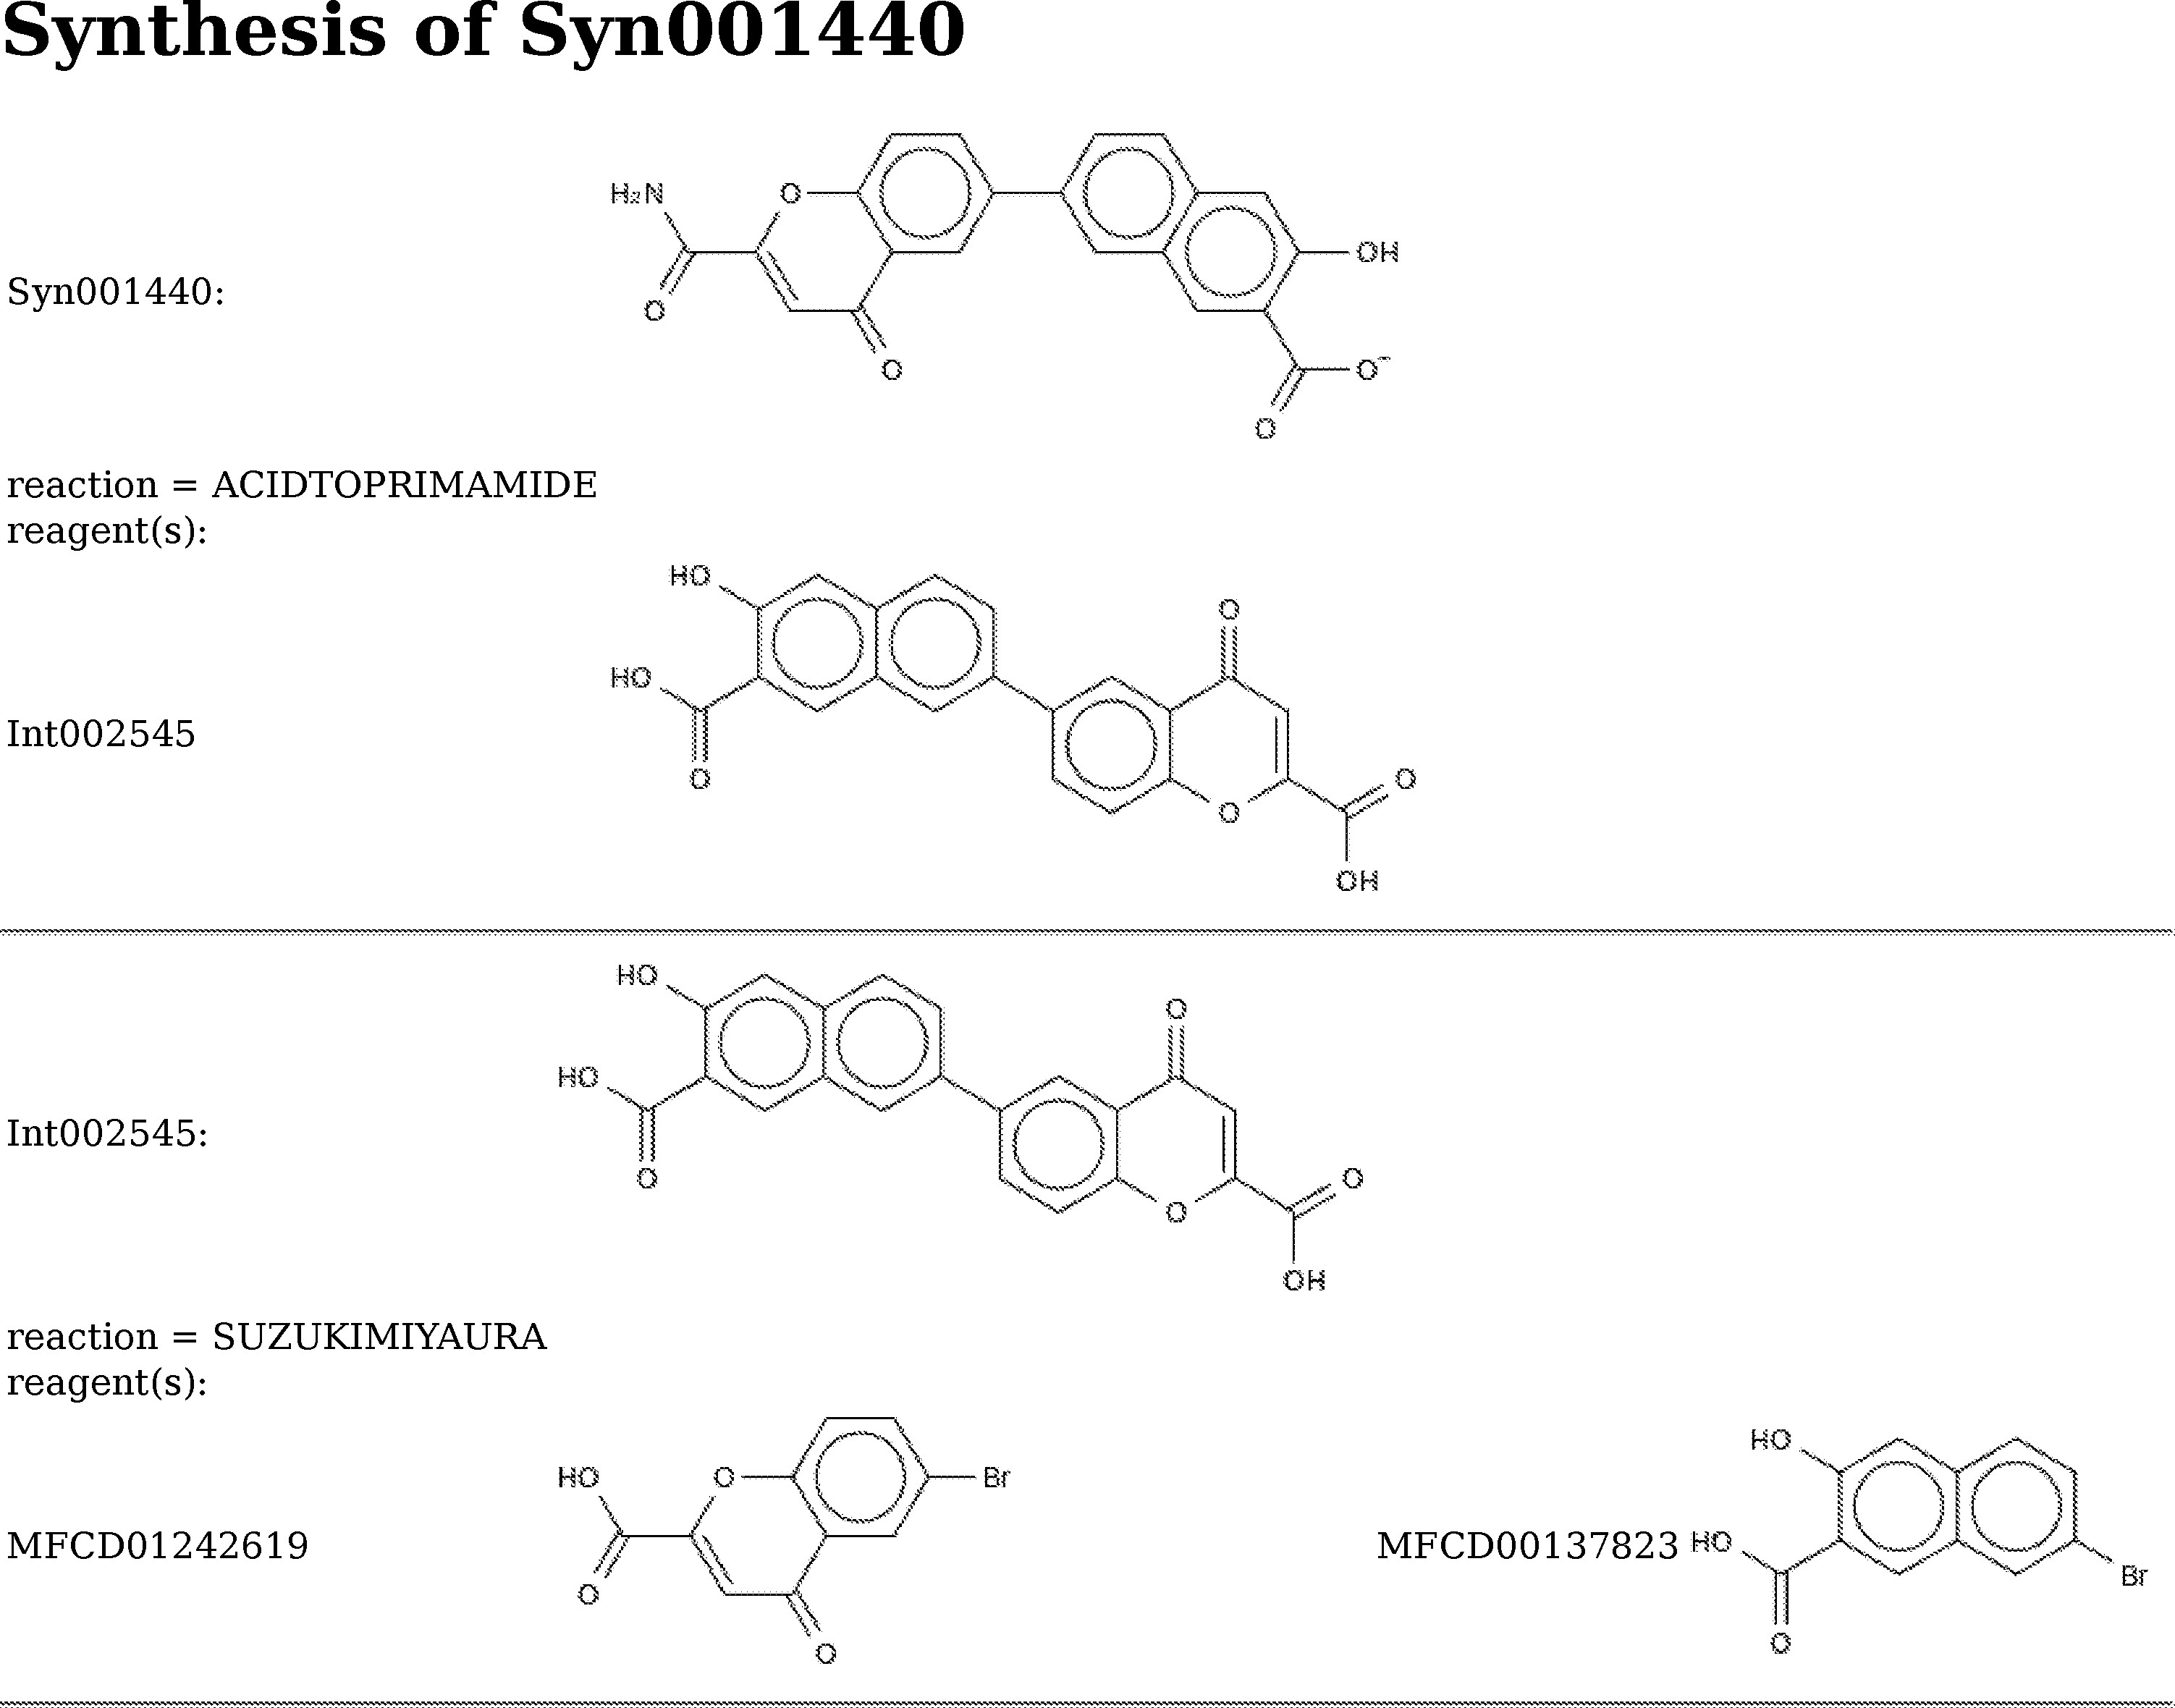 figure of Syn001440 synthesis, 2D